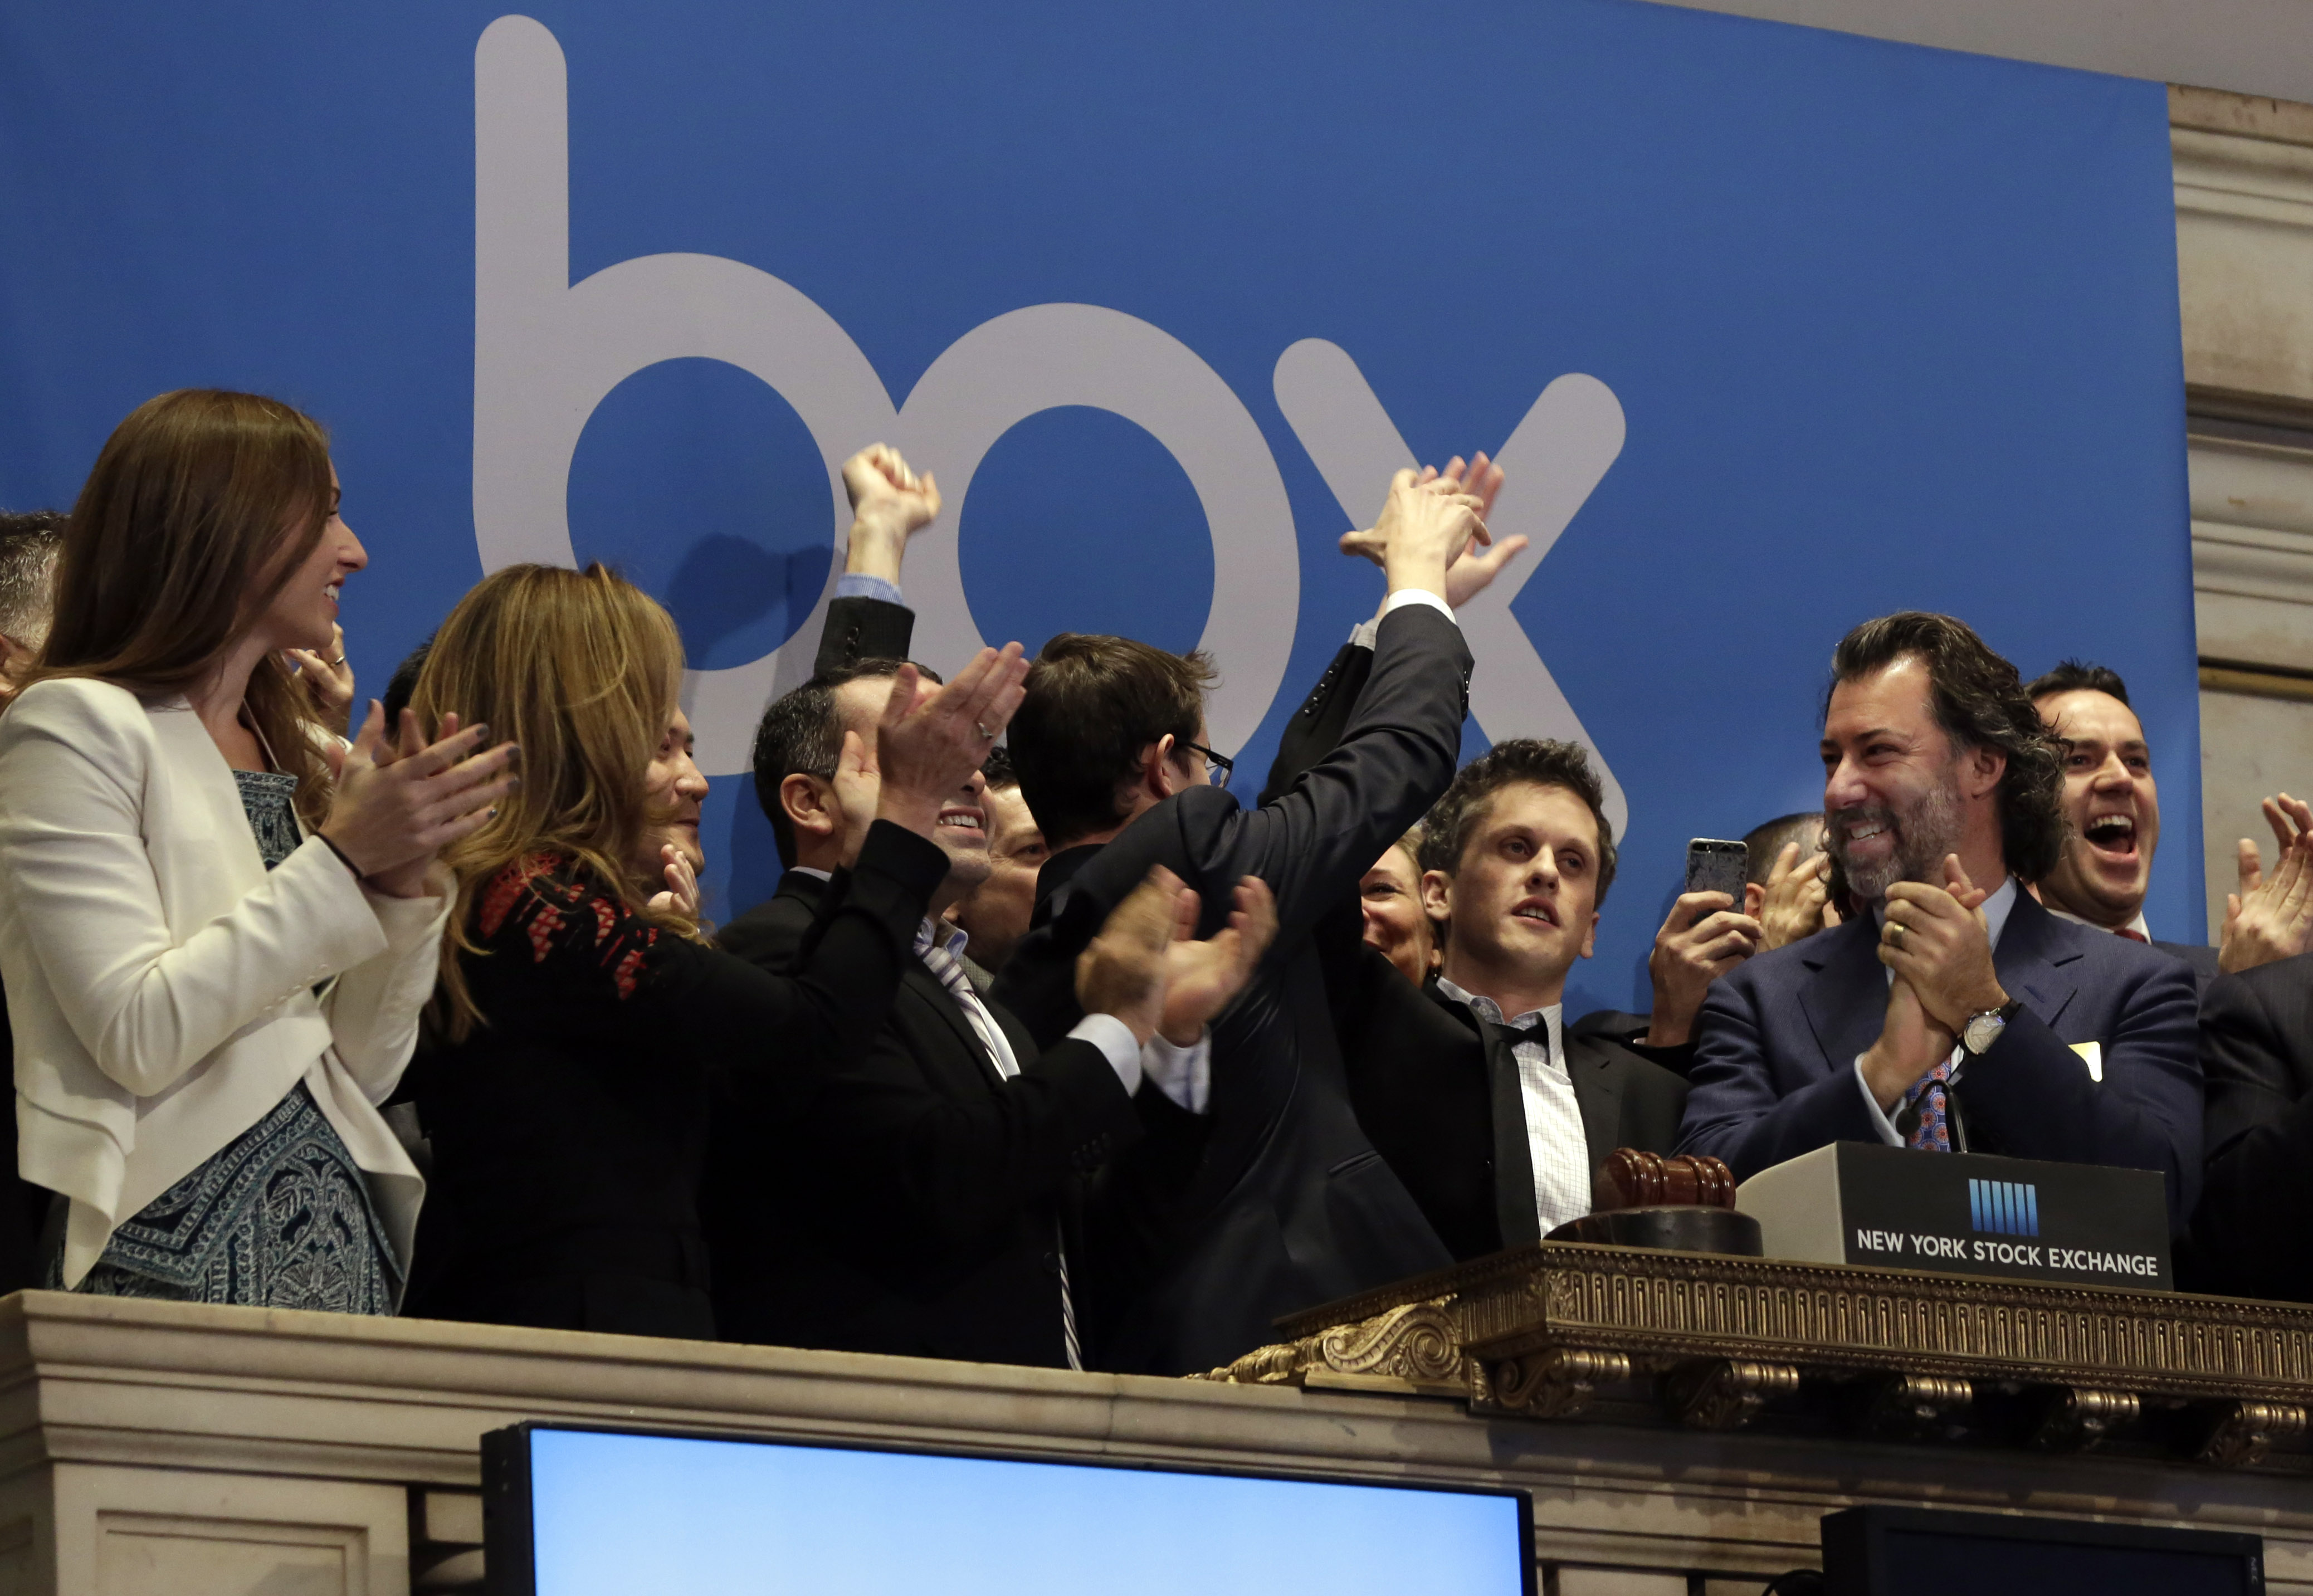 Box, Inc. Chairman, CEO &amp; co-founder Aaron Levie, second from right, gets a high-five during opening bell ceremonies to mark the company's IPO at the New York Stock Exchange on Jan. 23, 2015.